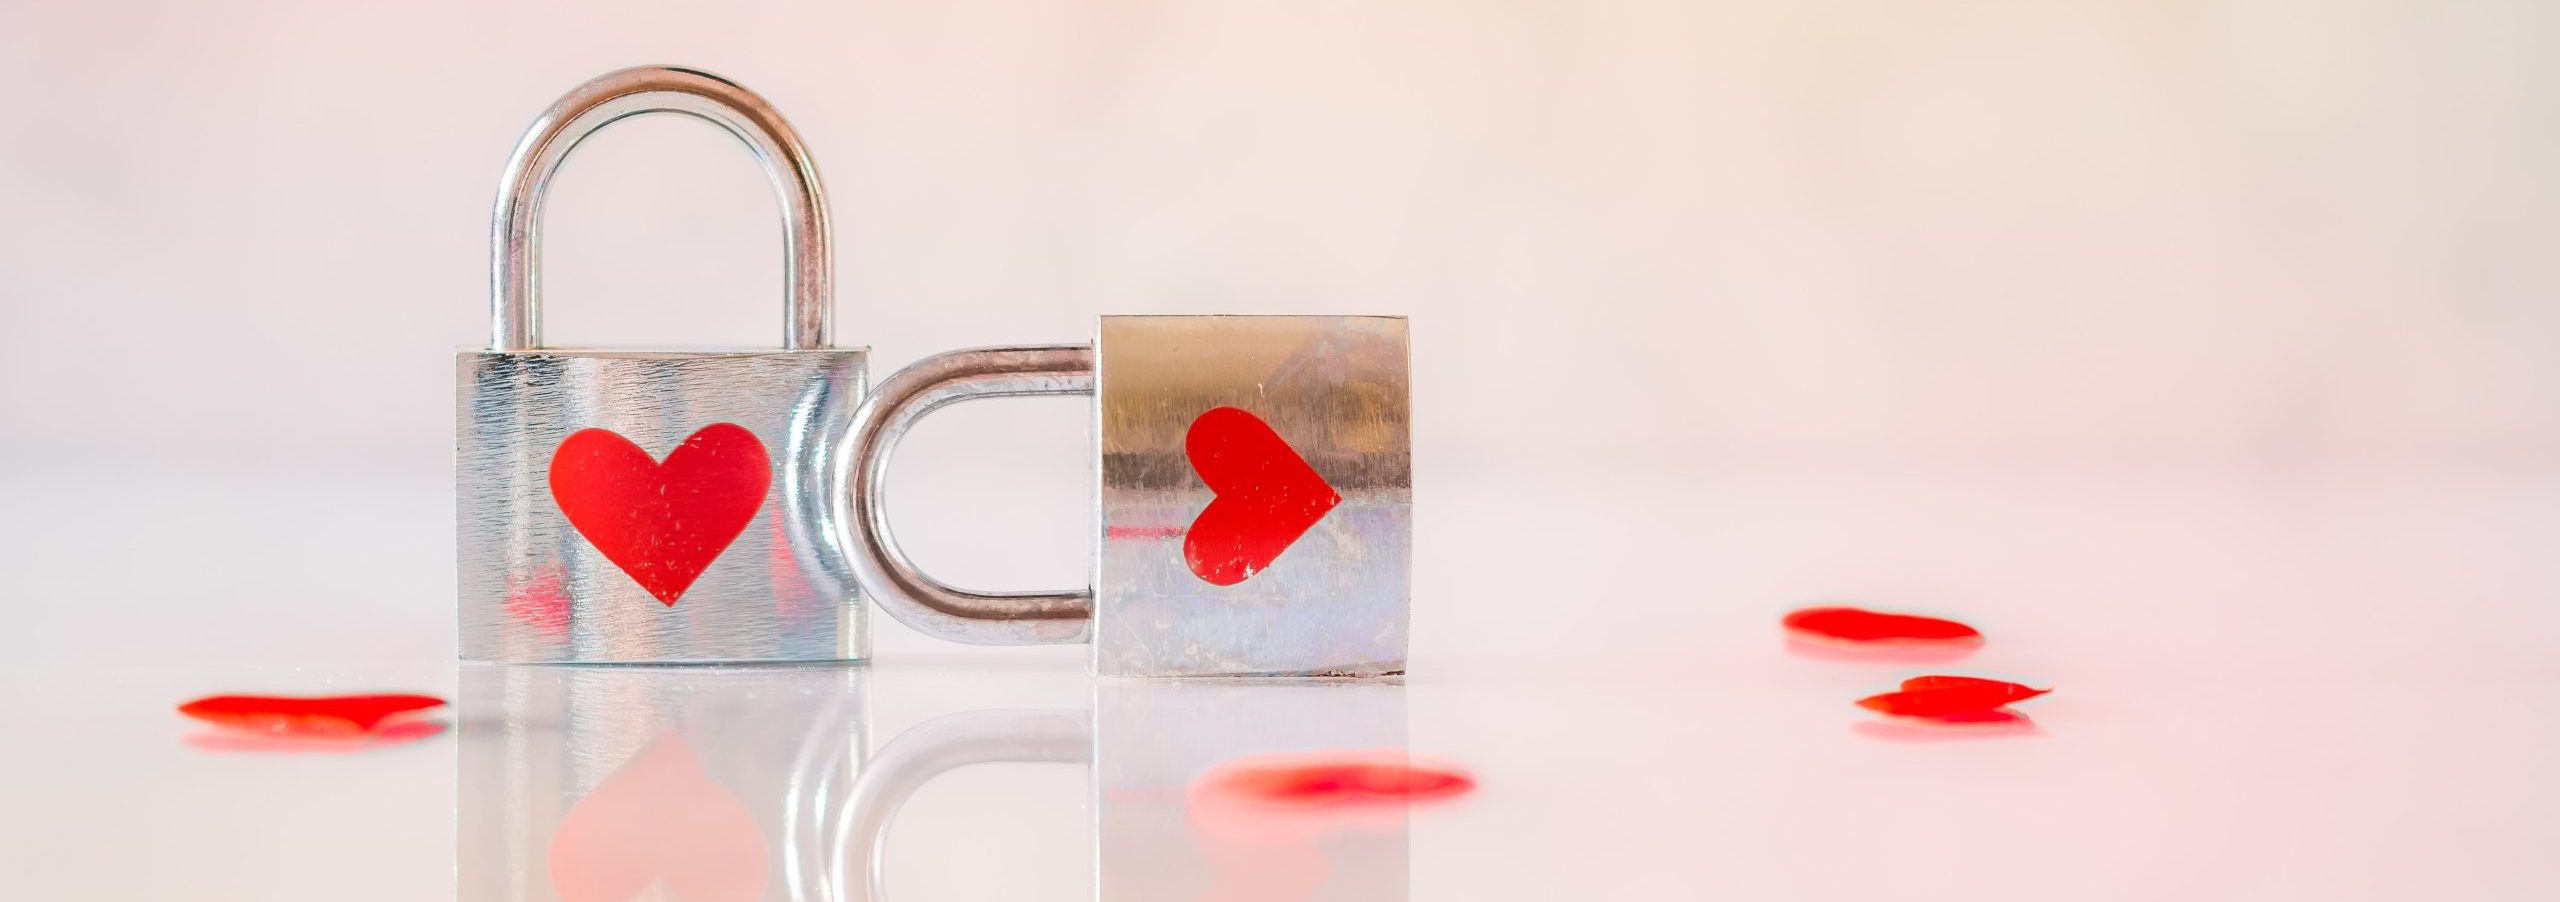 two locks with a heart in mypaydayloan.com